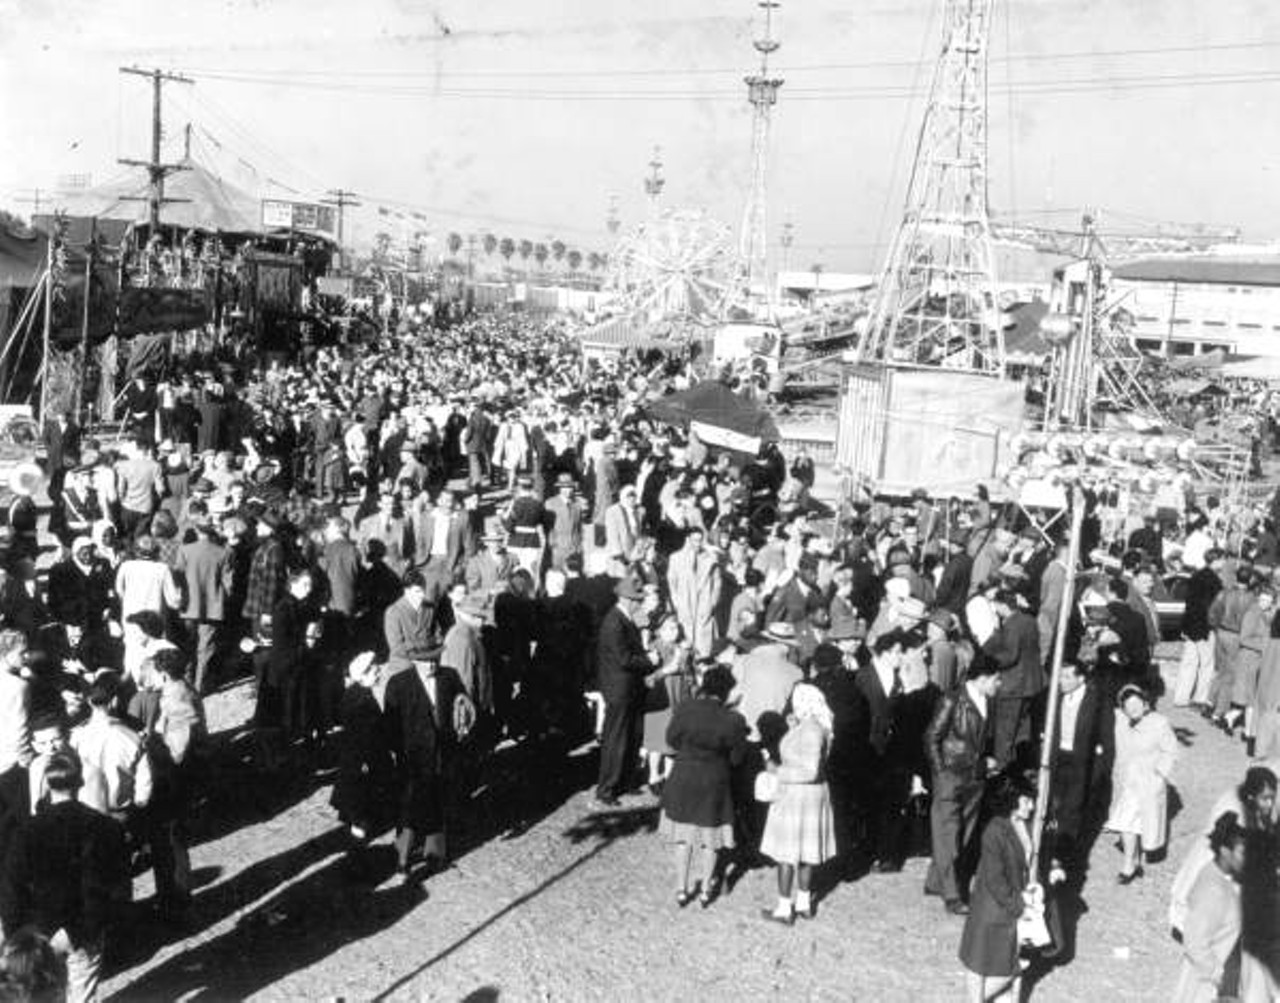 Crowds gathered at the Florida State Fair, 1947